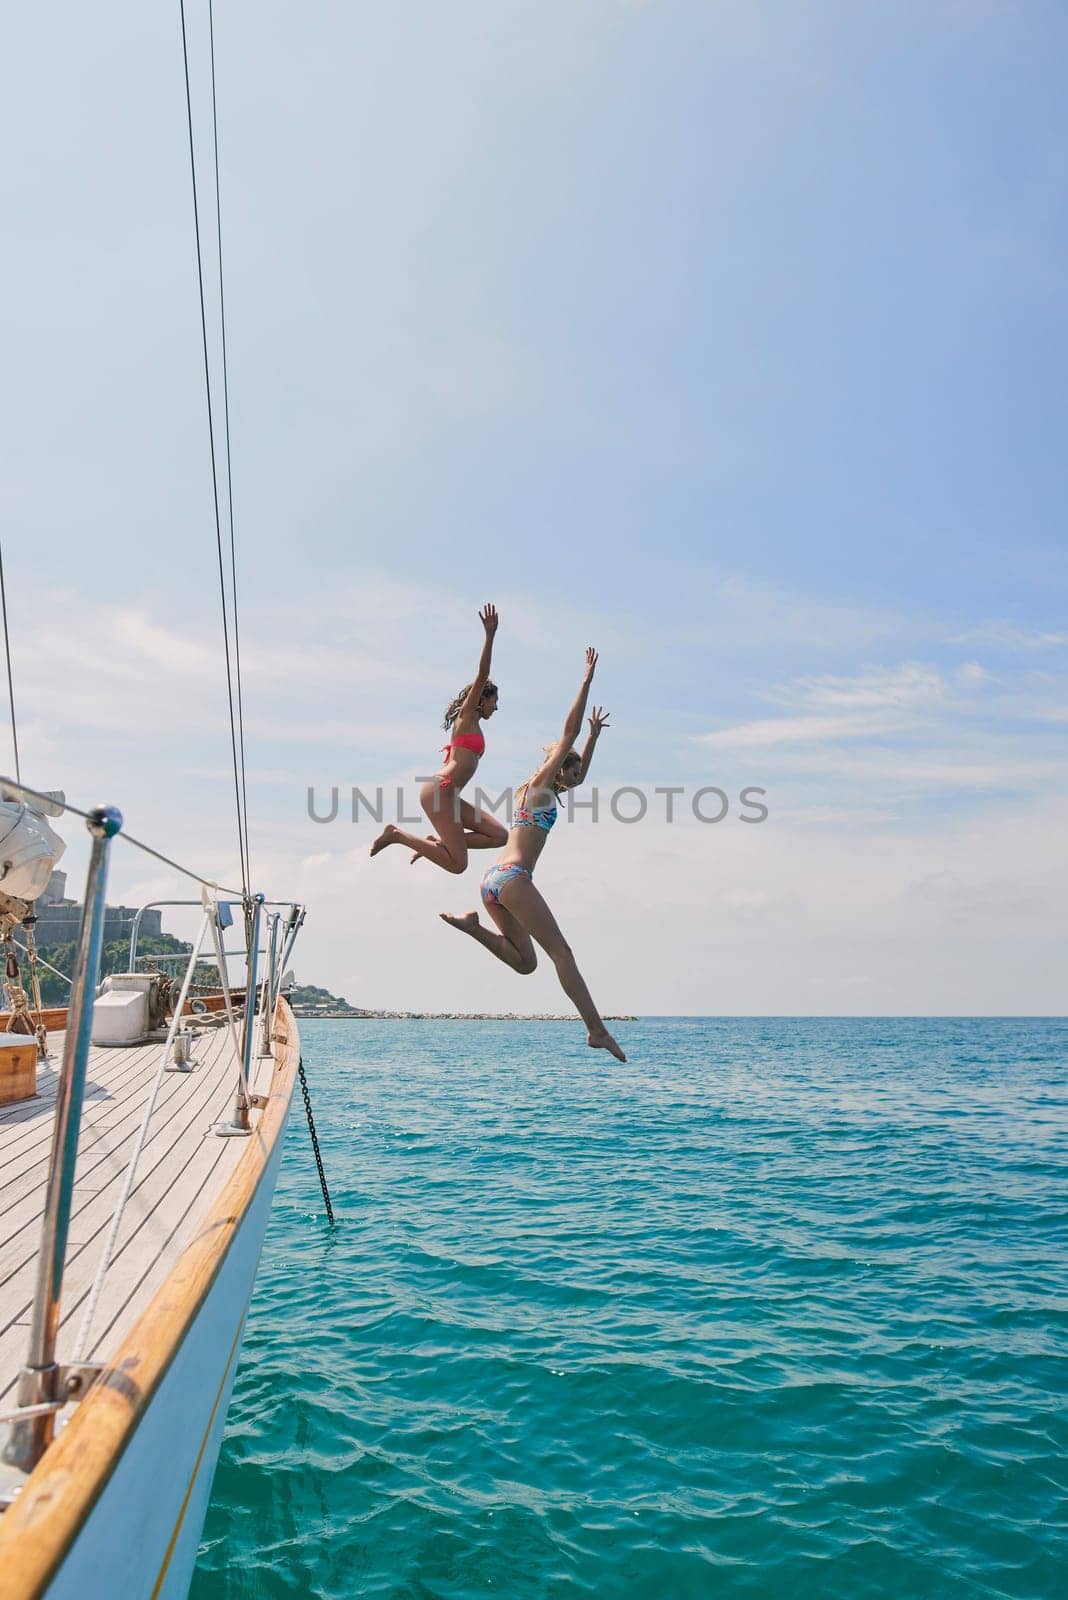 Summer, sailing and friends jumping off a yacht together into the ocean for freedom, fun or swimming. Travel, energy and bikini with girls leaving a boat to jump into the sea while on a luxury cruise.